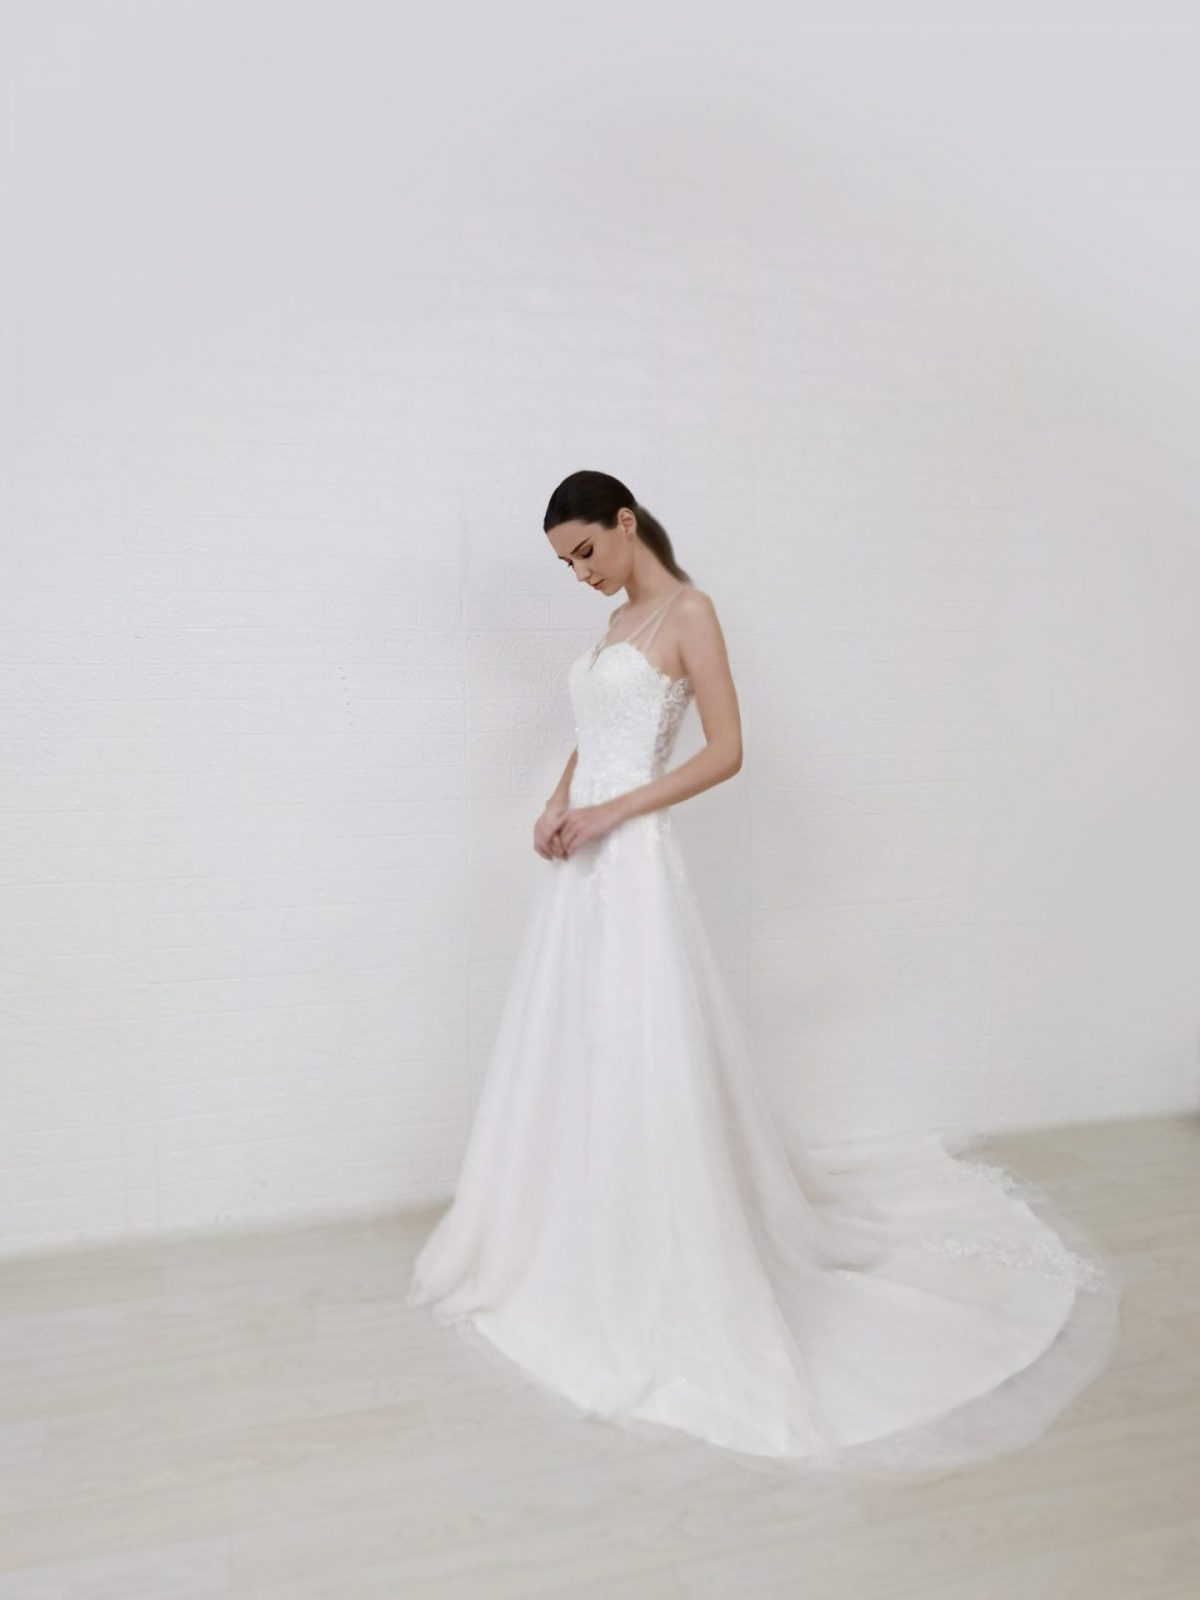 Wedding gowns in Singapore | Fleur Dsign